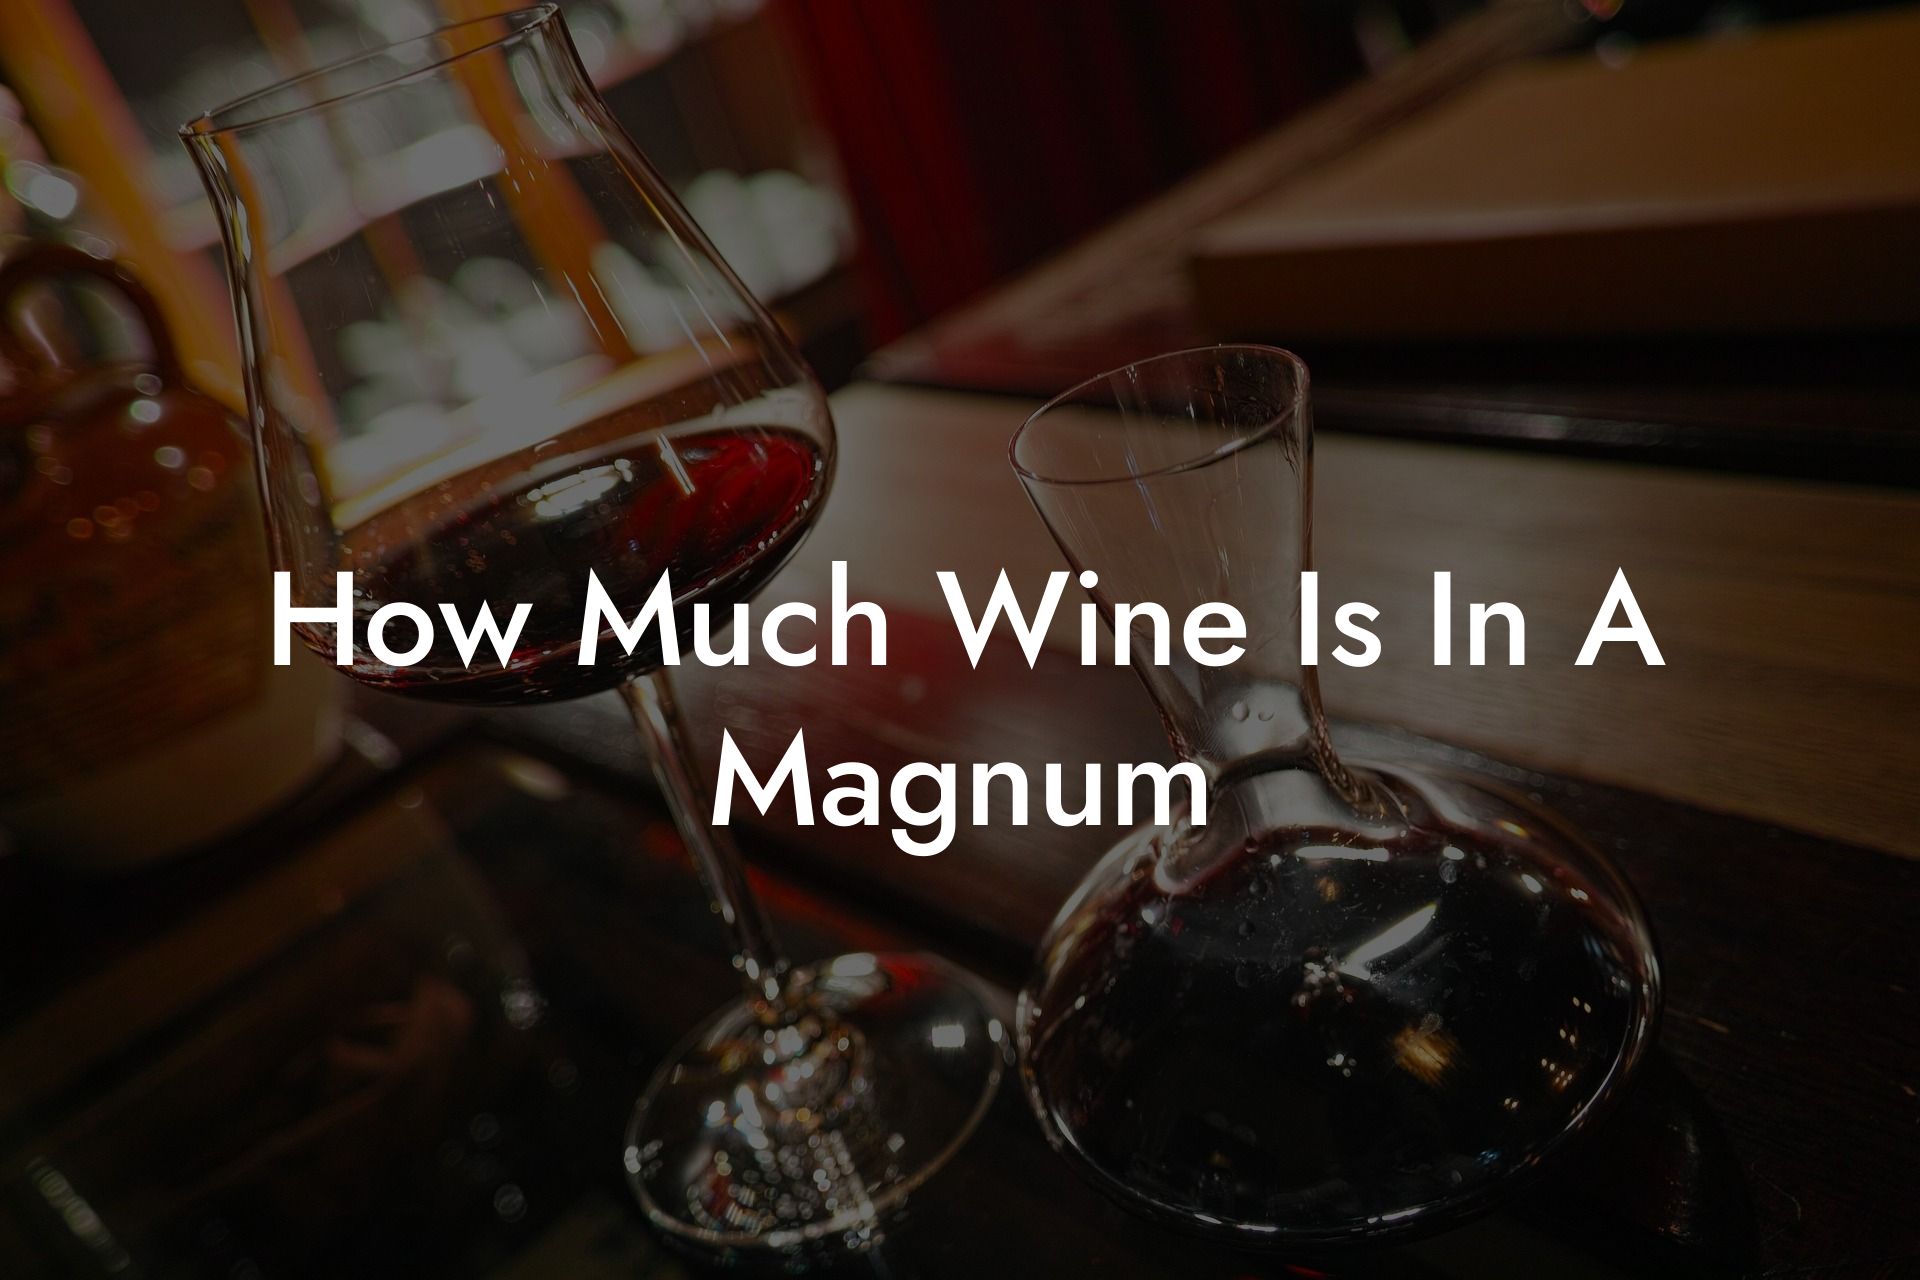 How Much Wine Is In A Magnum